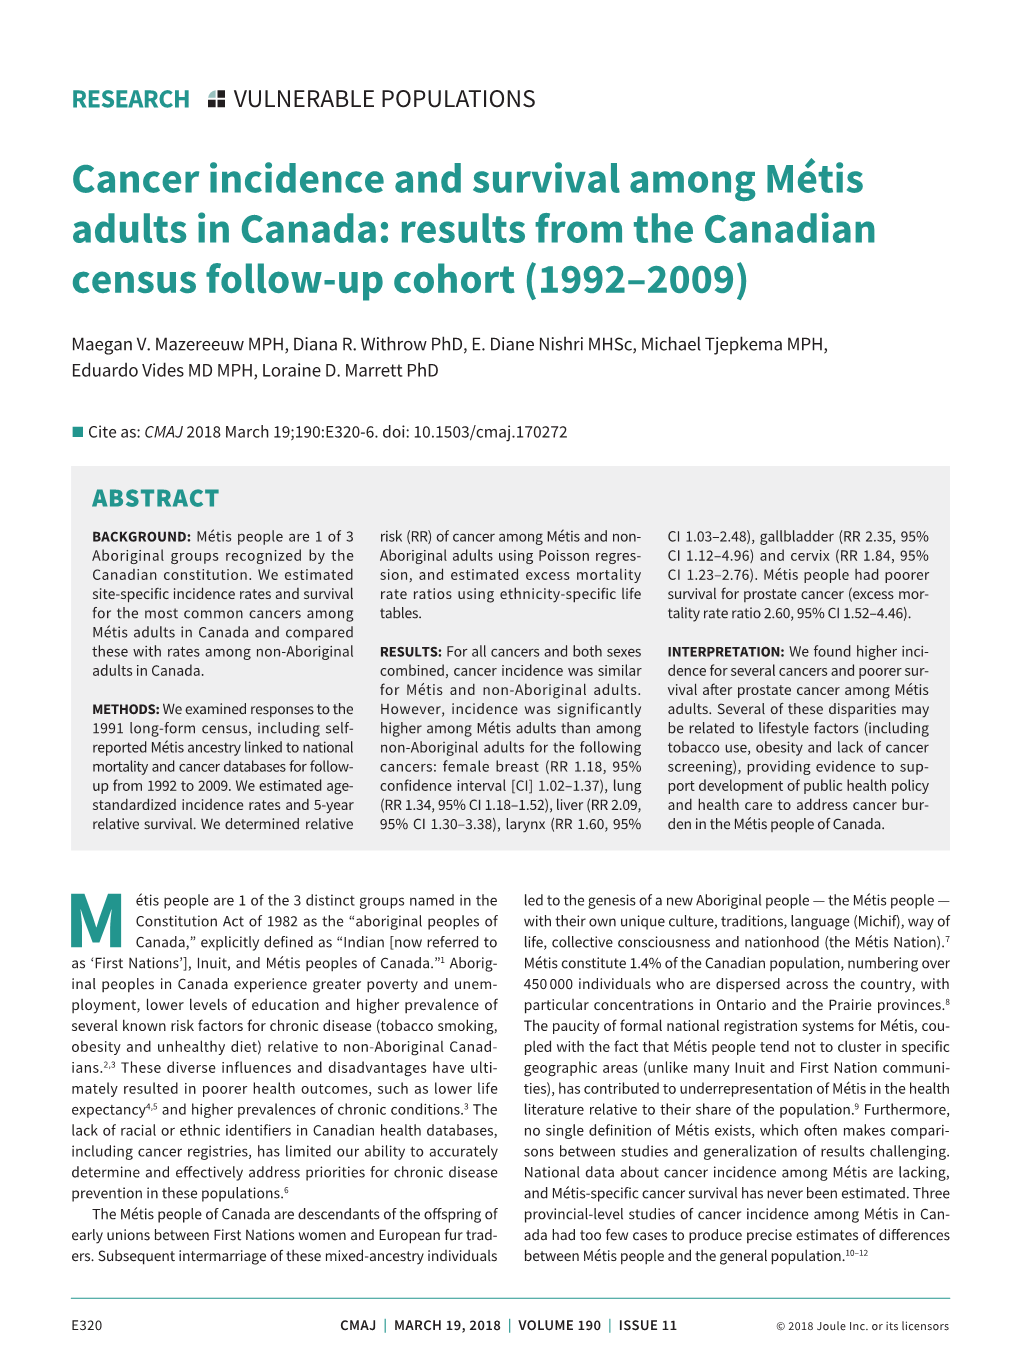 Cancer Incidence and Survival Among Métis Adults in Canada: Results from the Canadian Census Follow-Up Cohort (1992–2009)